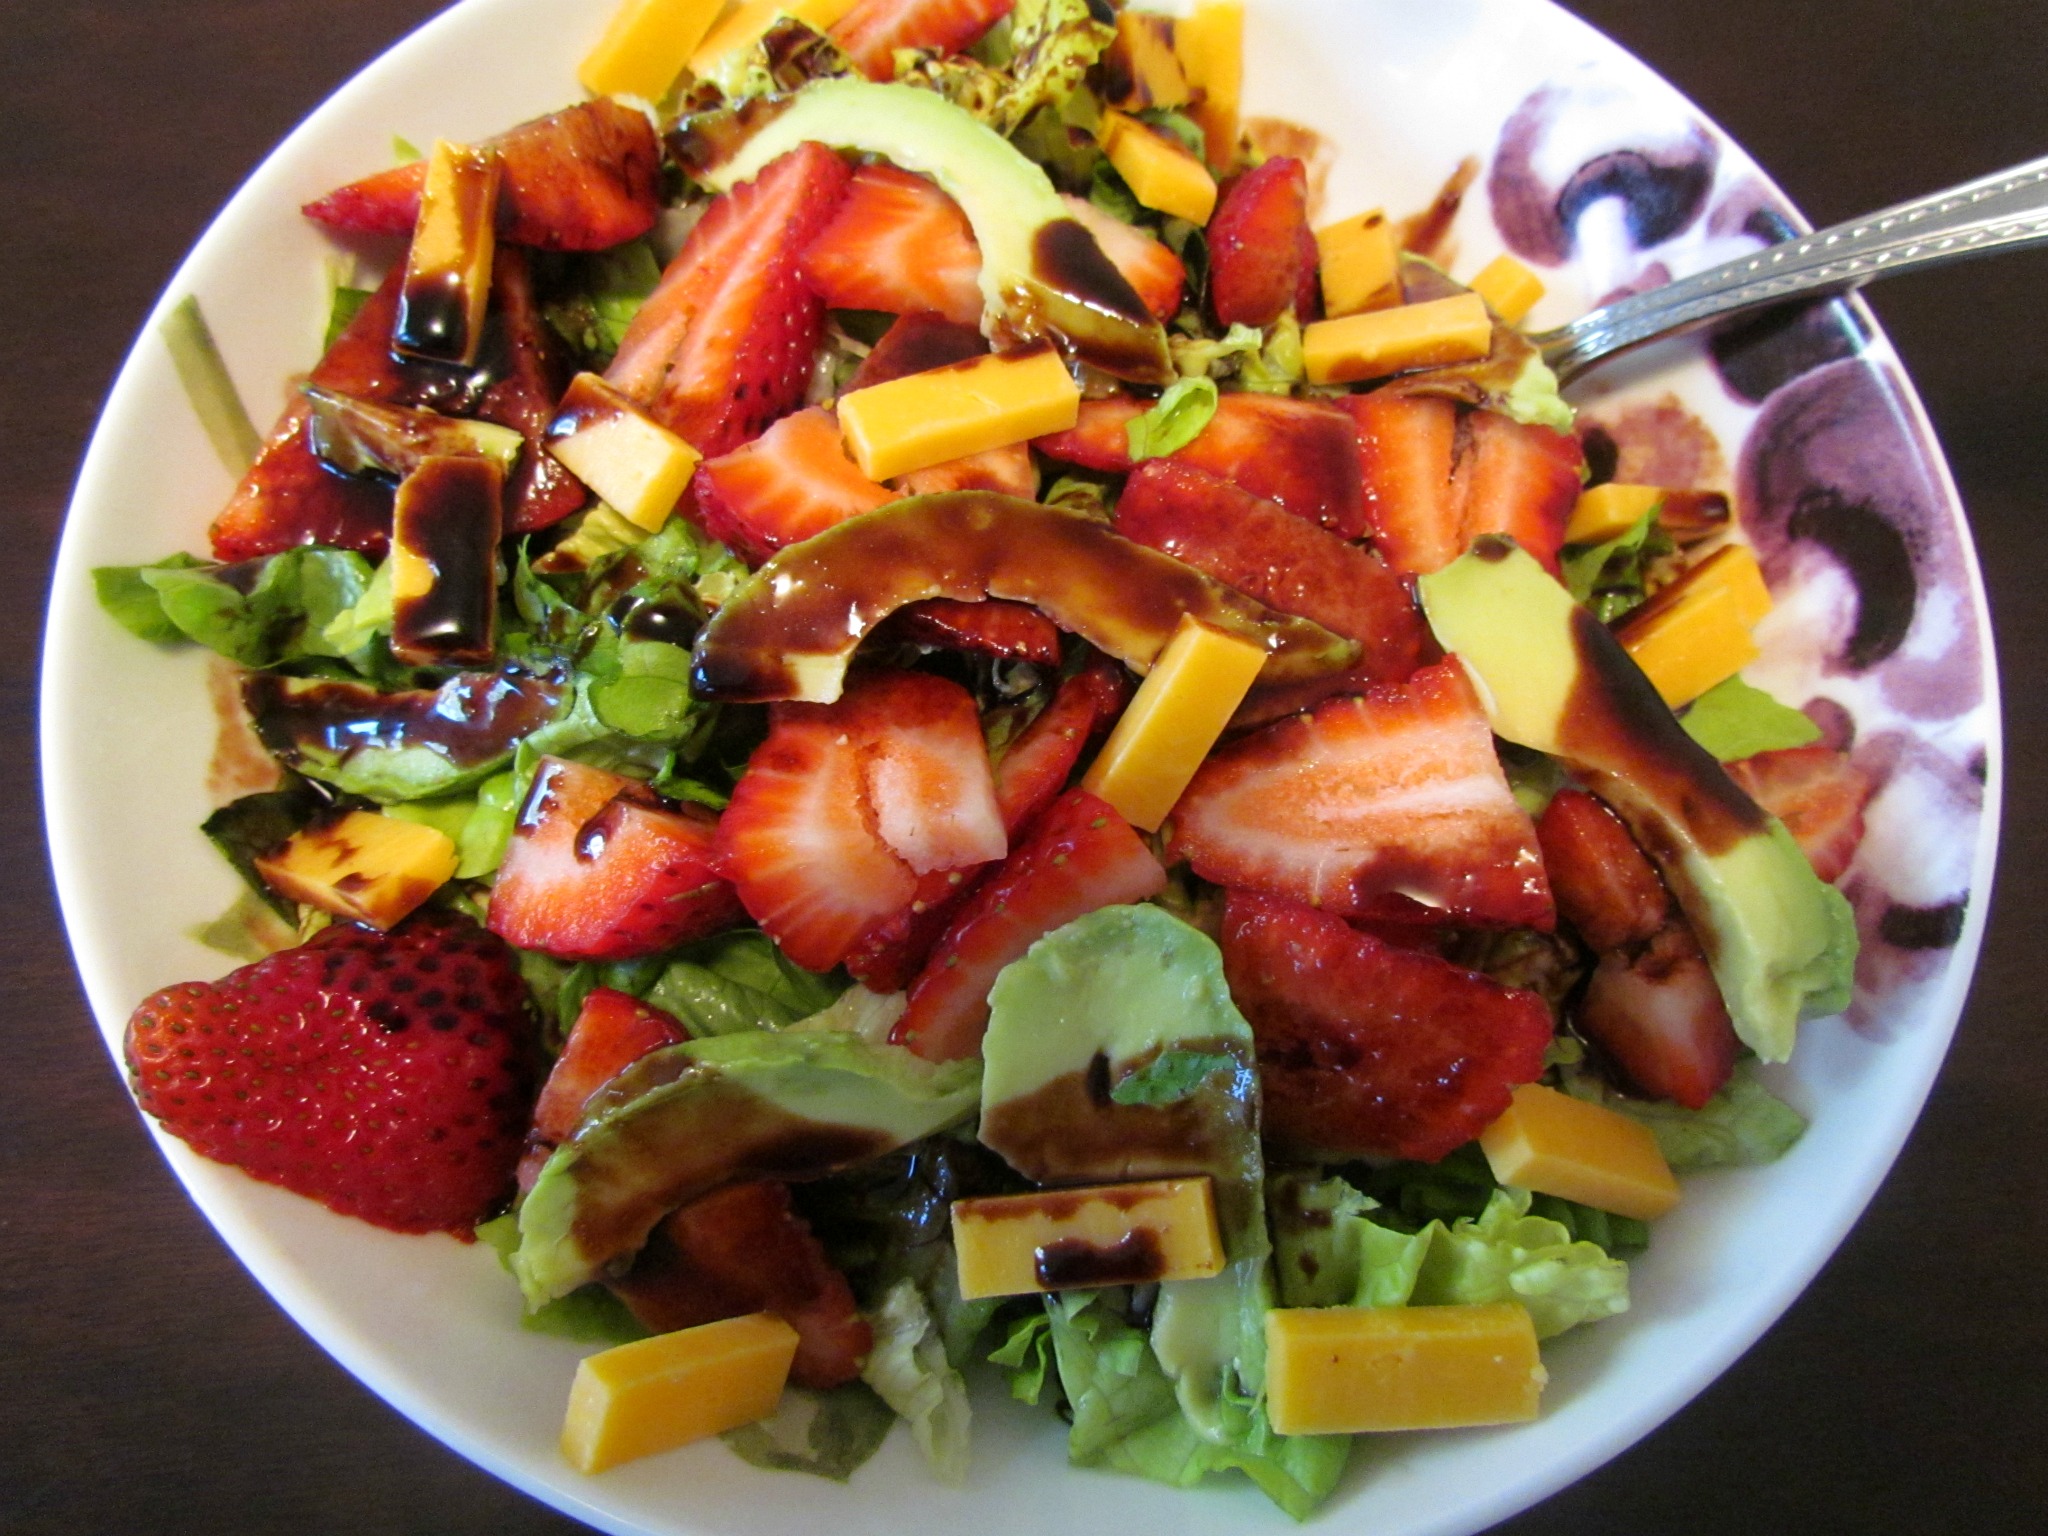 Strawberry Avocado Sunflower Seed Salad with Strawberry Balsamic Dressing